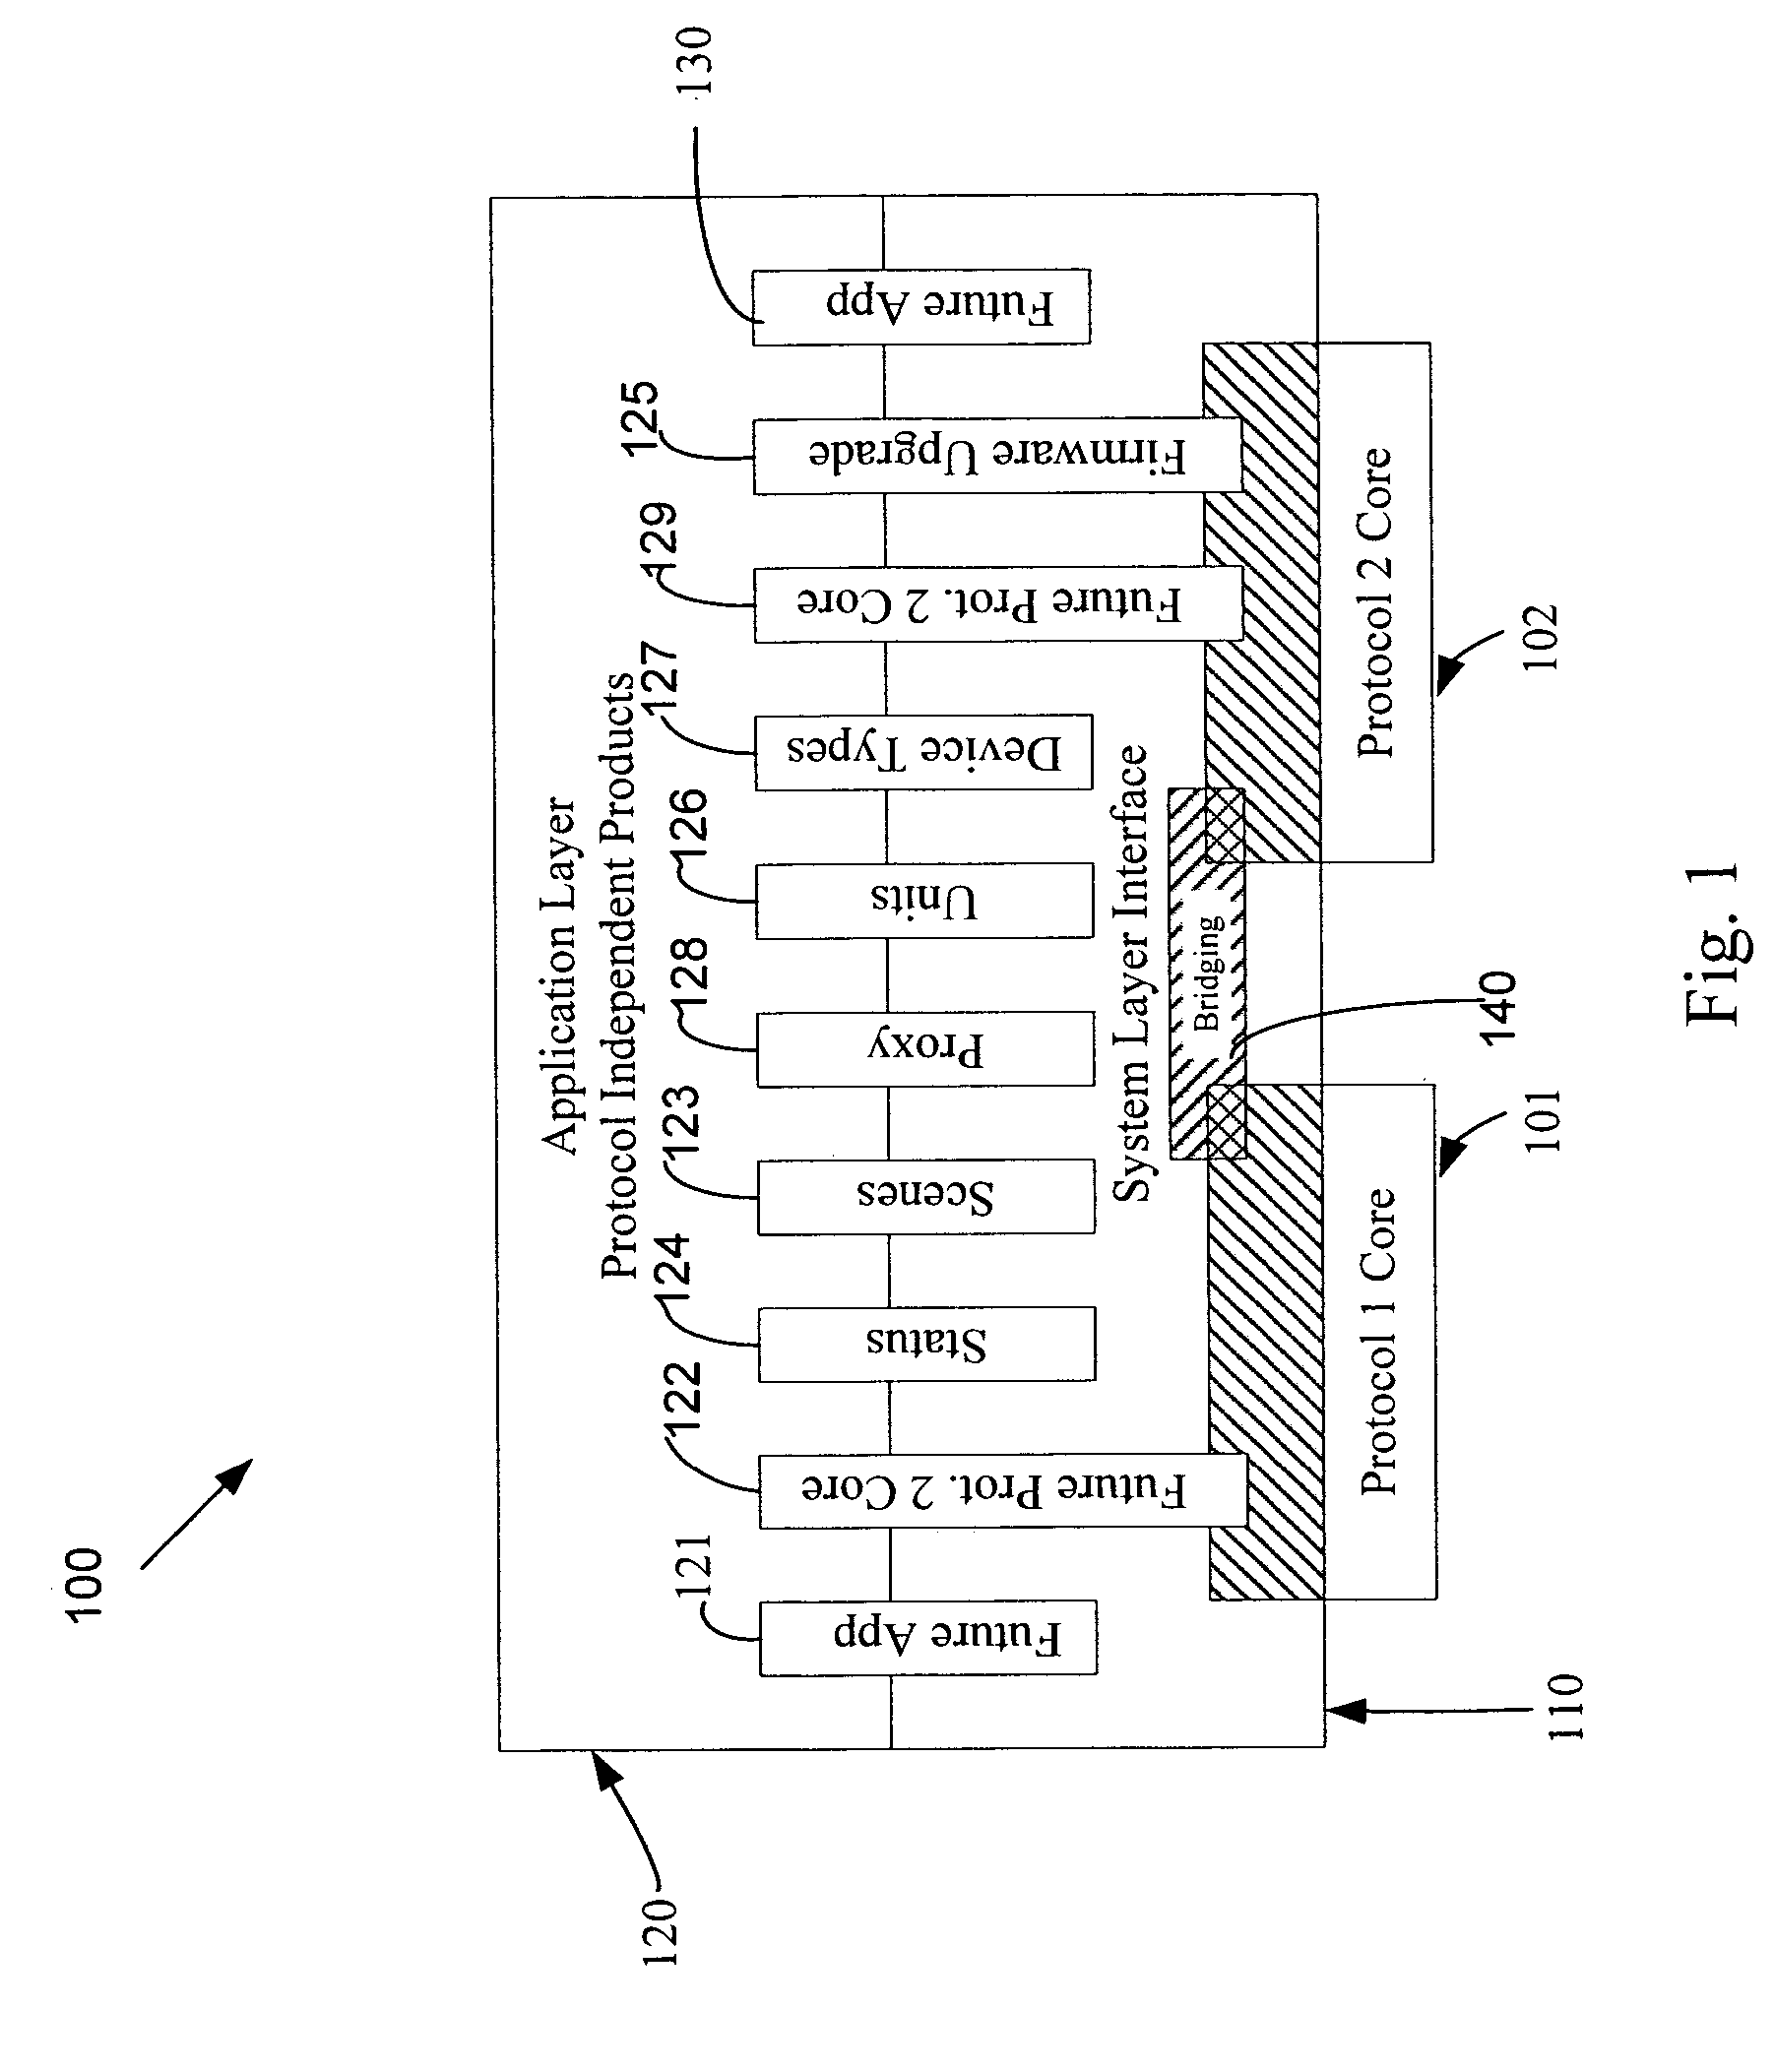 Messaging in a home automation data transfer system